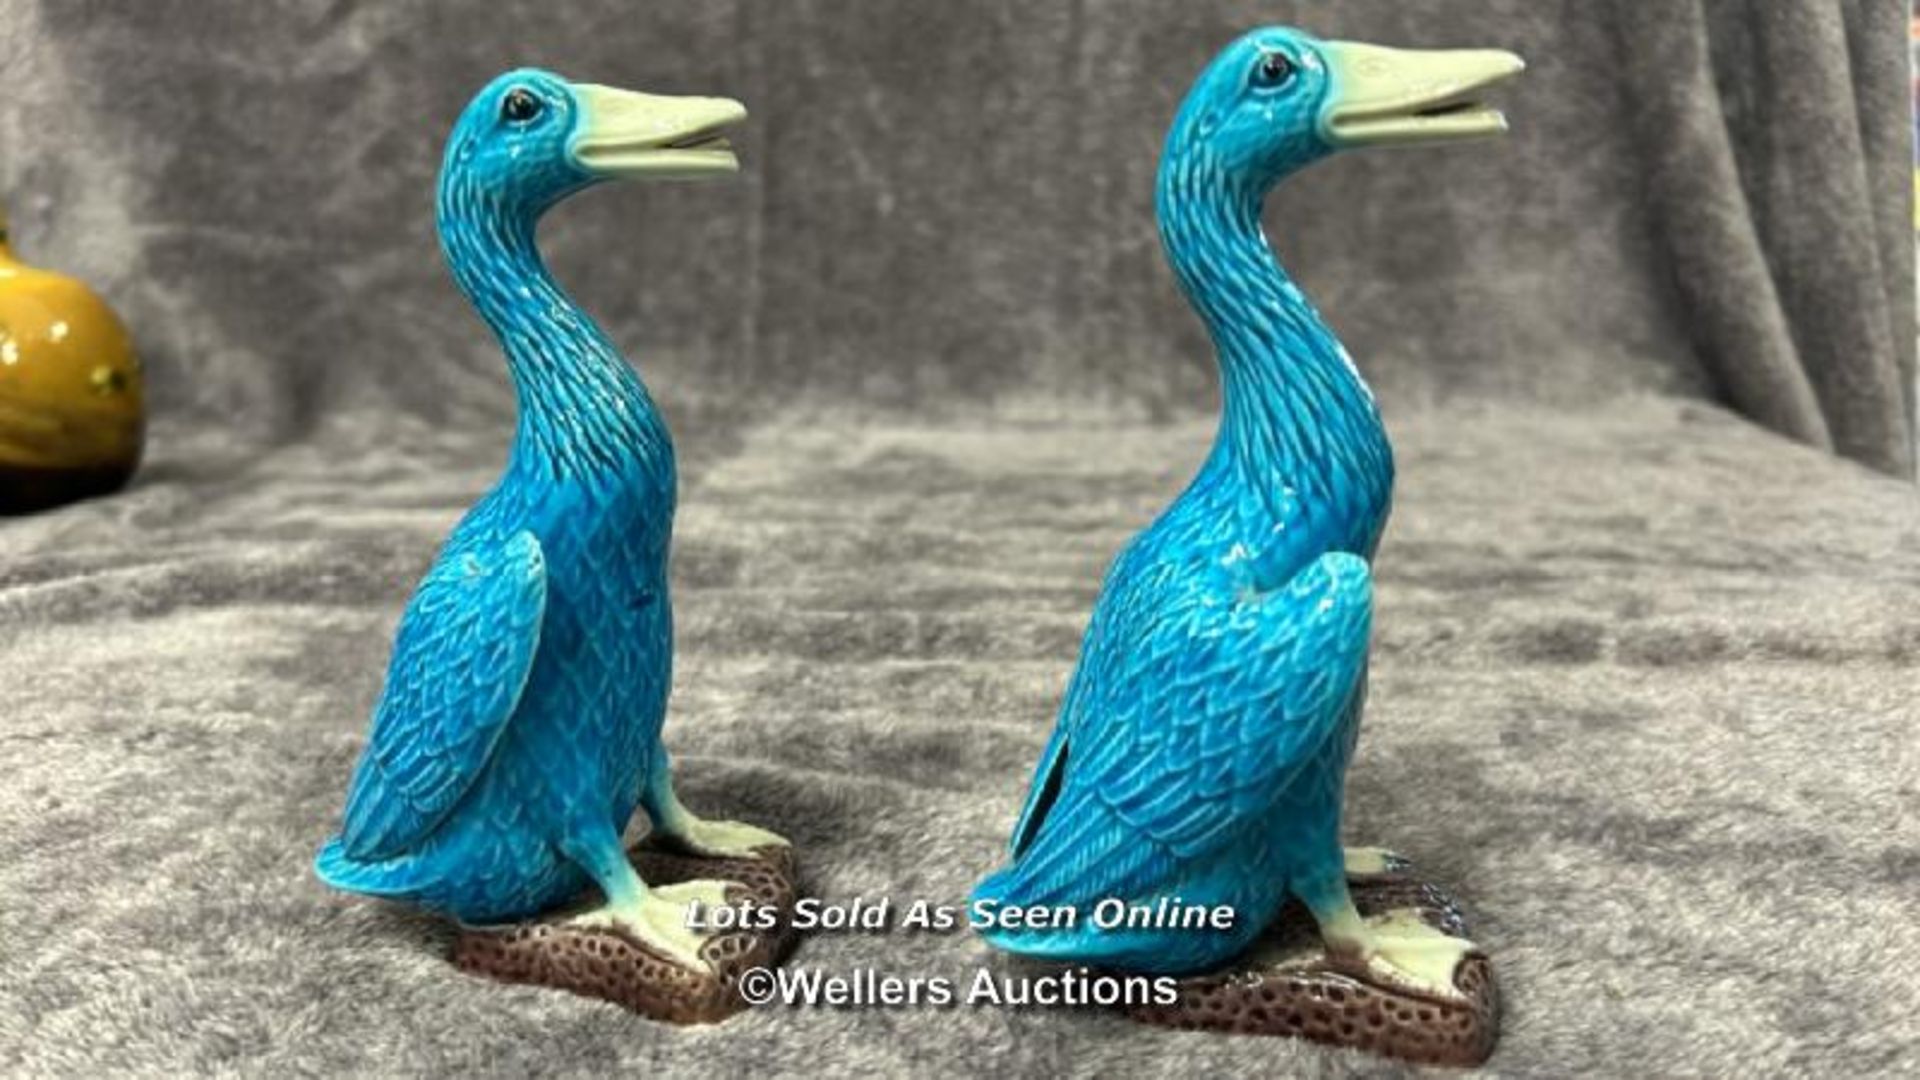 Set of six Chinese turquoise glazed porcelain duck figures, the tallest 29cm high / AN6 - Image 15 of 17